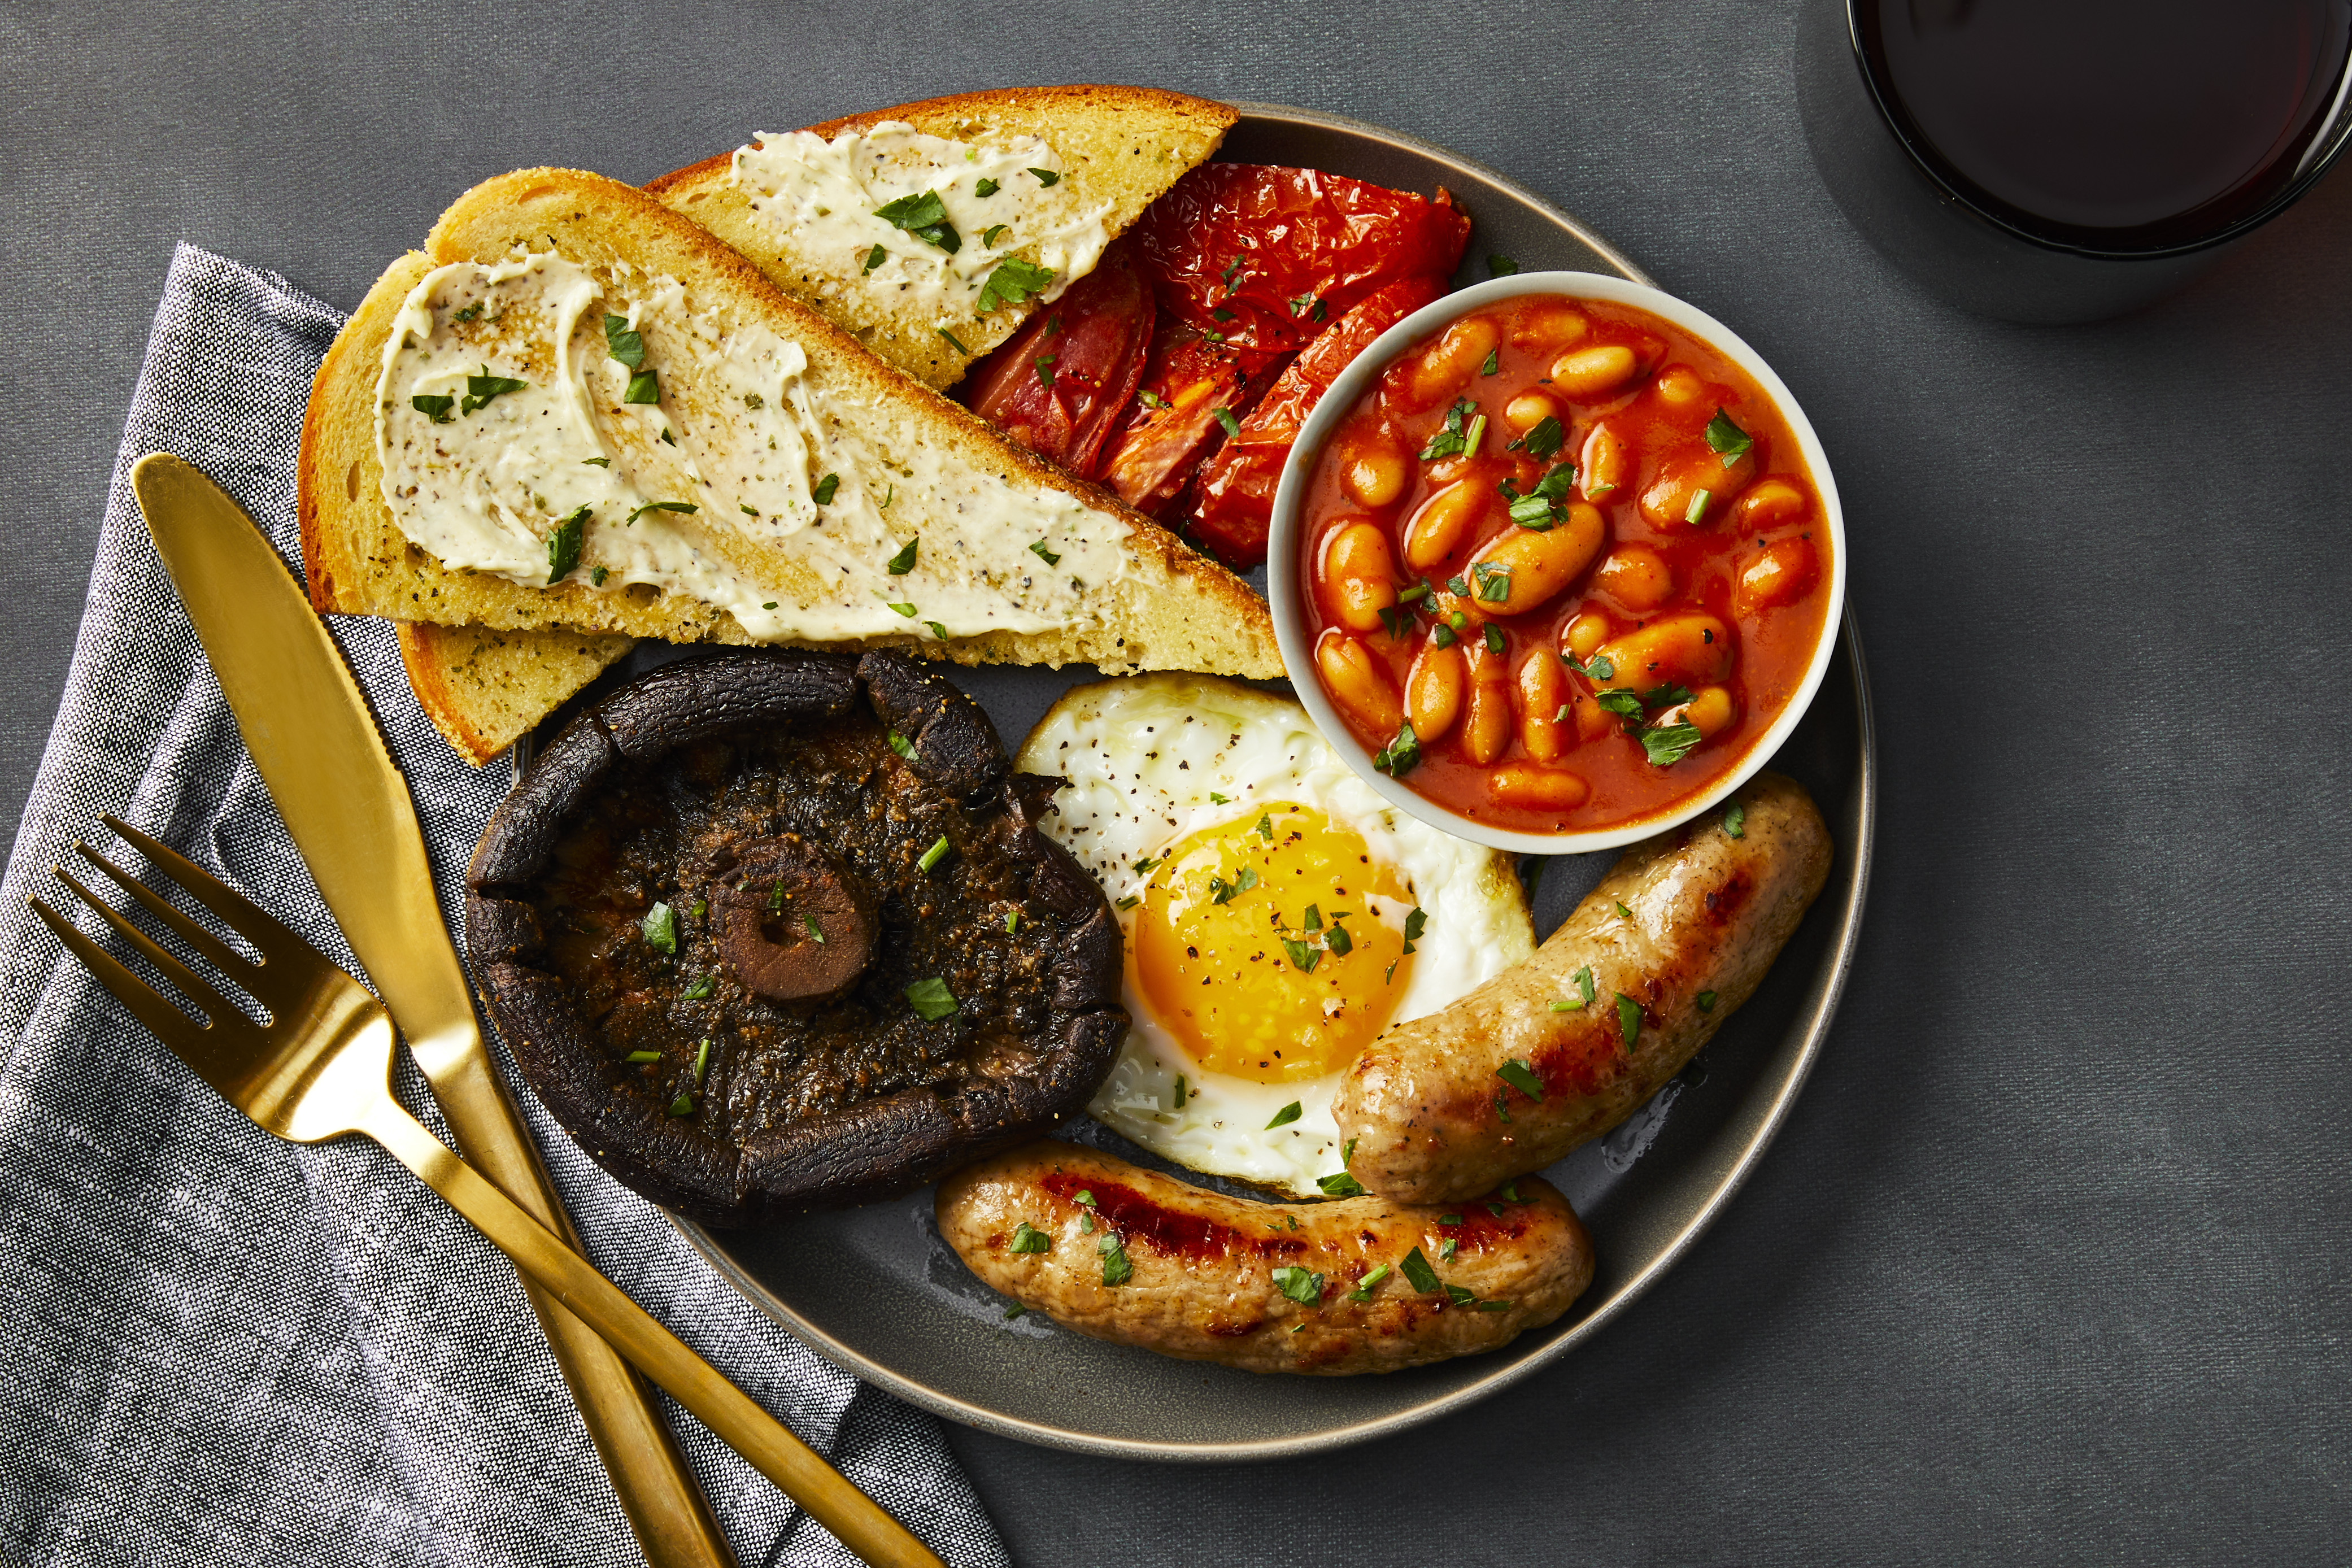 Full English Breakfast Recipe for a One-Pan British Fry-Up